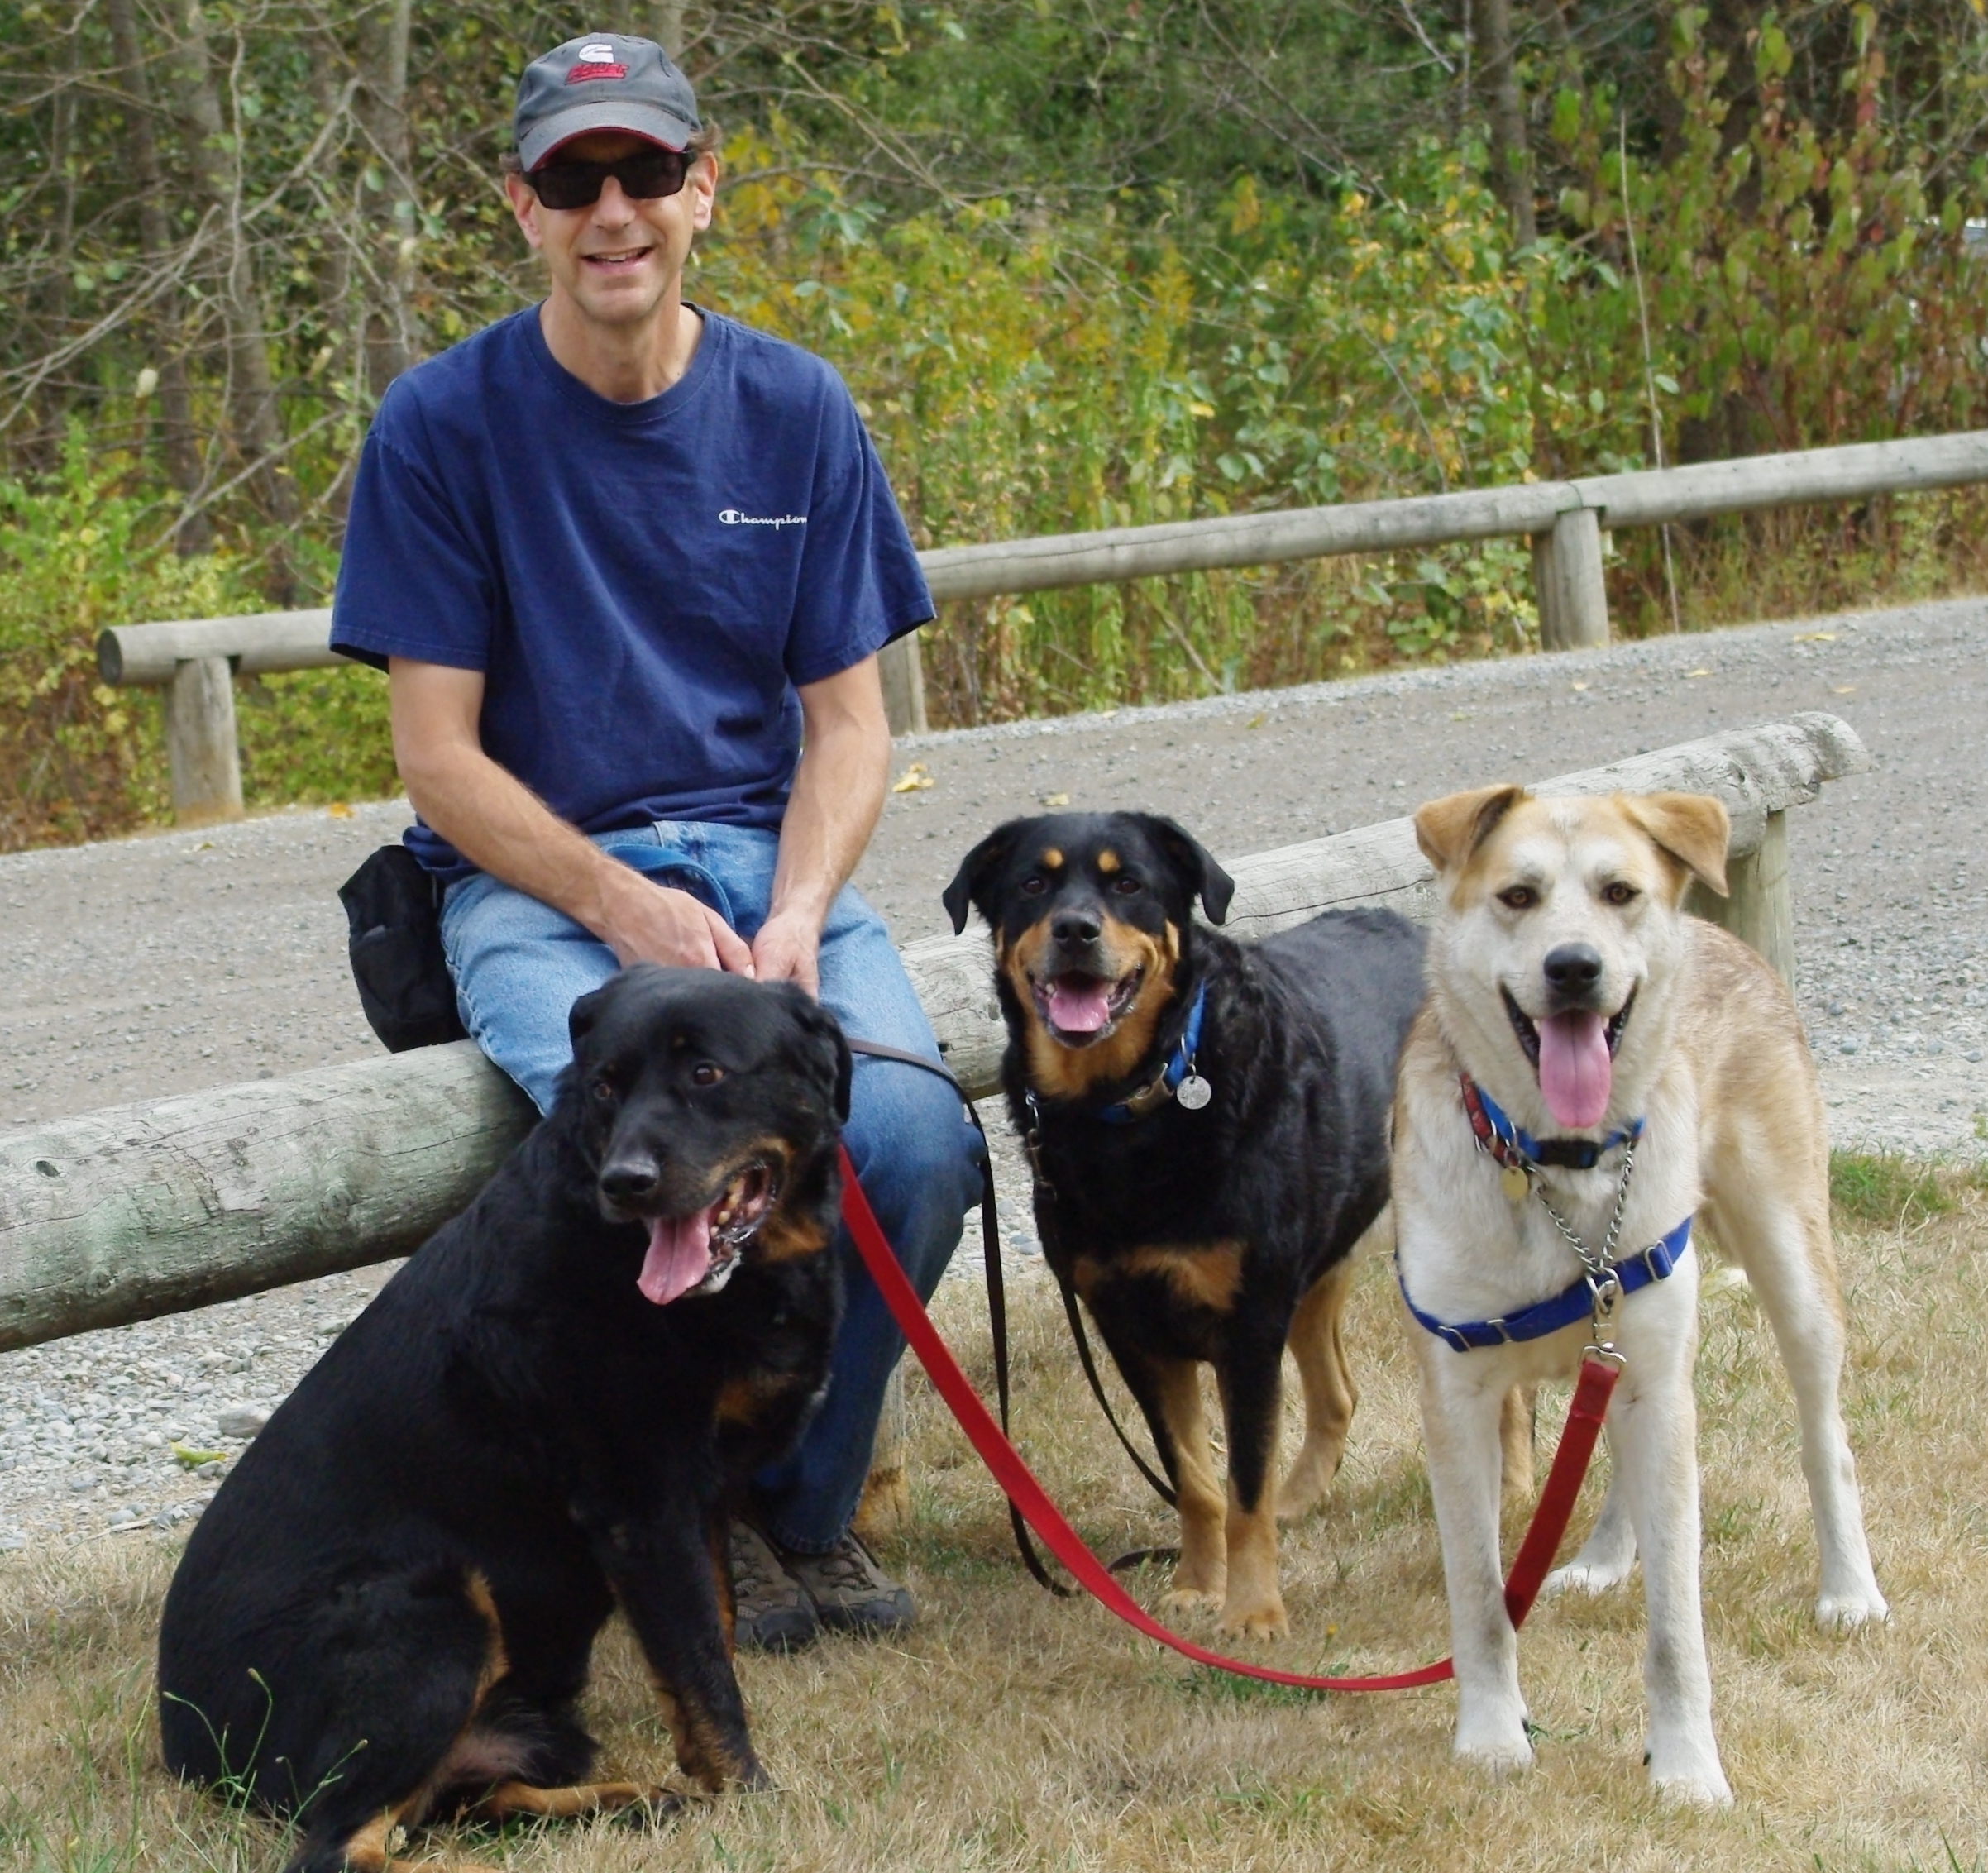 Trainer Andy with his three dogs